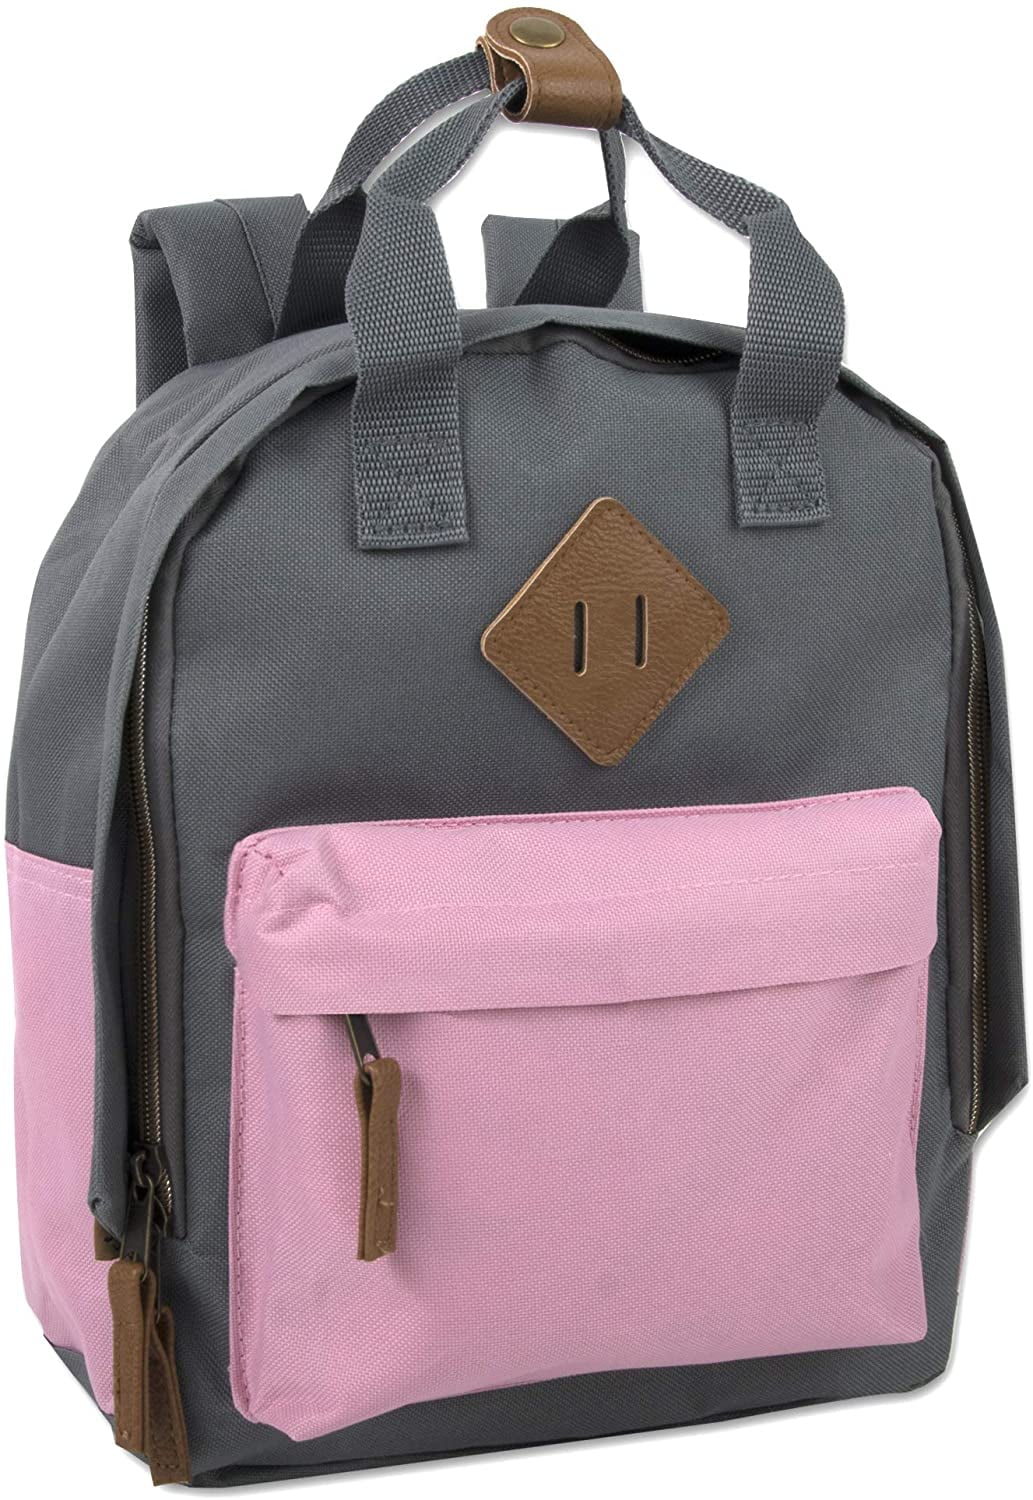 Black Canvas Mini Backpack for Everyday & Day Pack Rucksack in Solid Color Blocks 